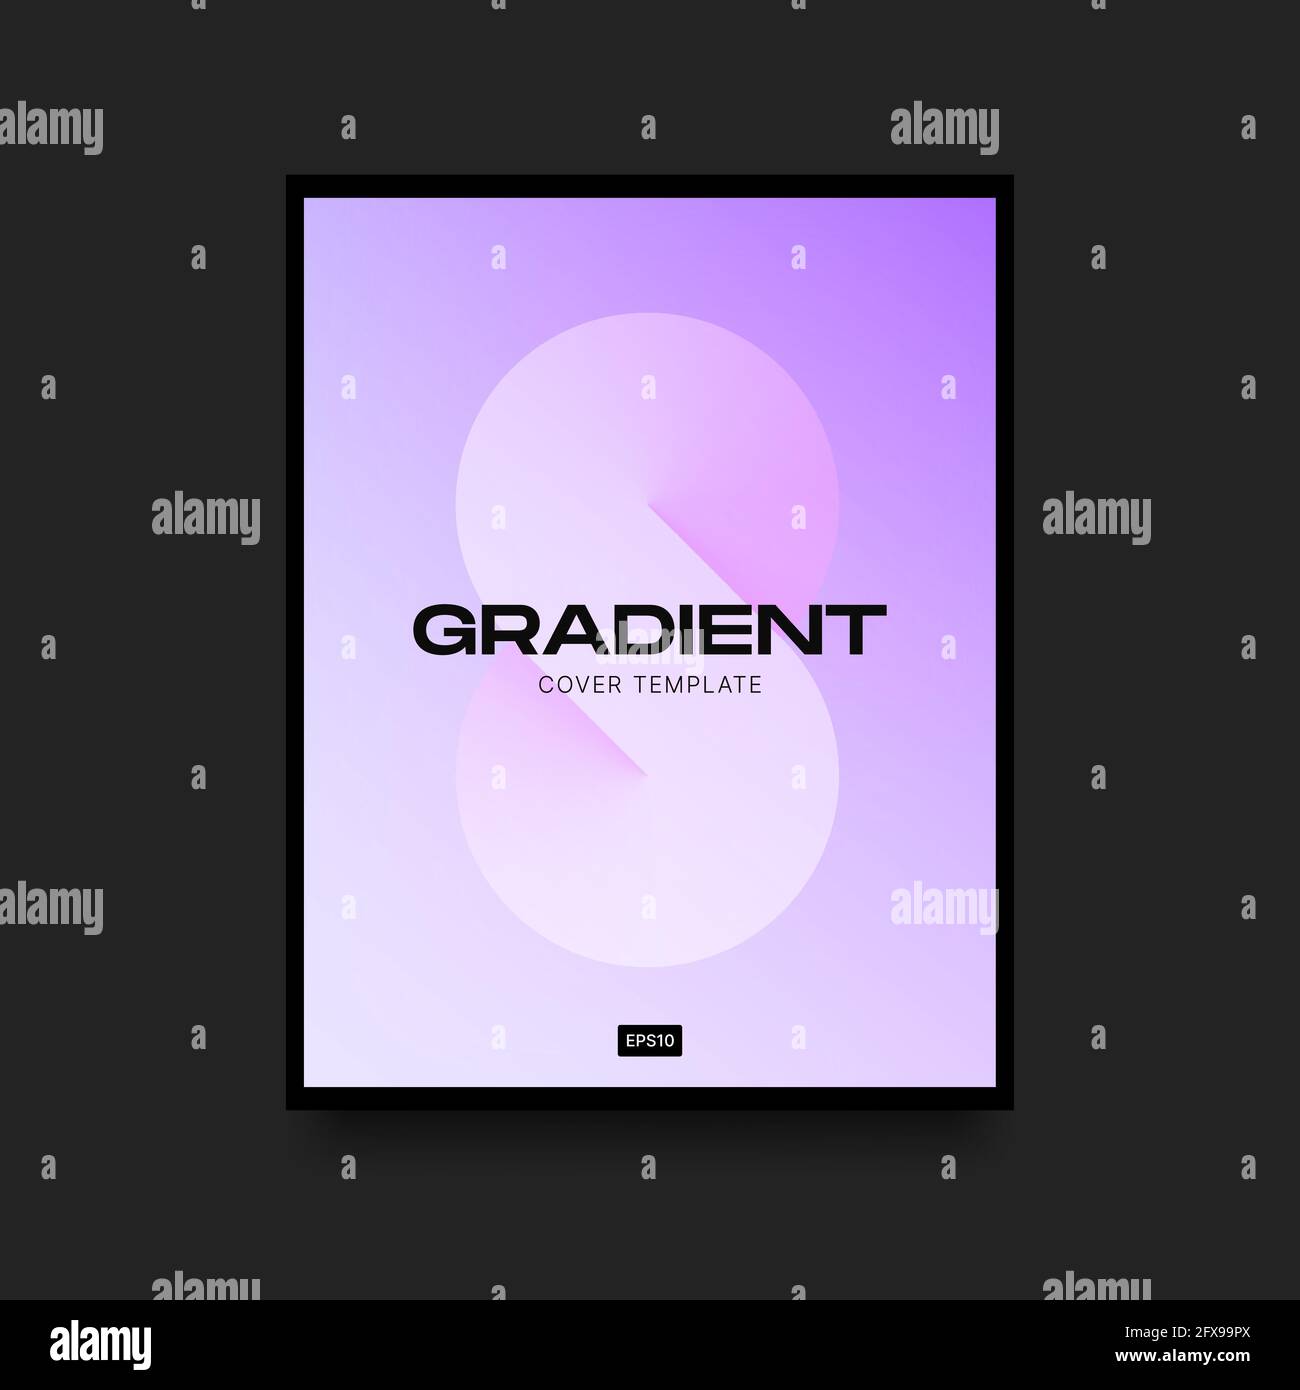 Delicate Pink Vertical Cover. Violet Gradient Template with Infinity Symbol. Vector illustration Stock Vector